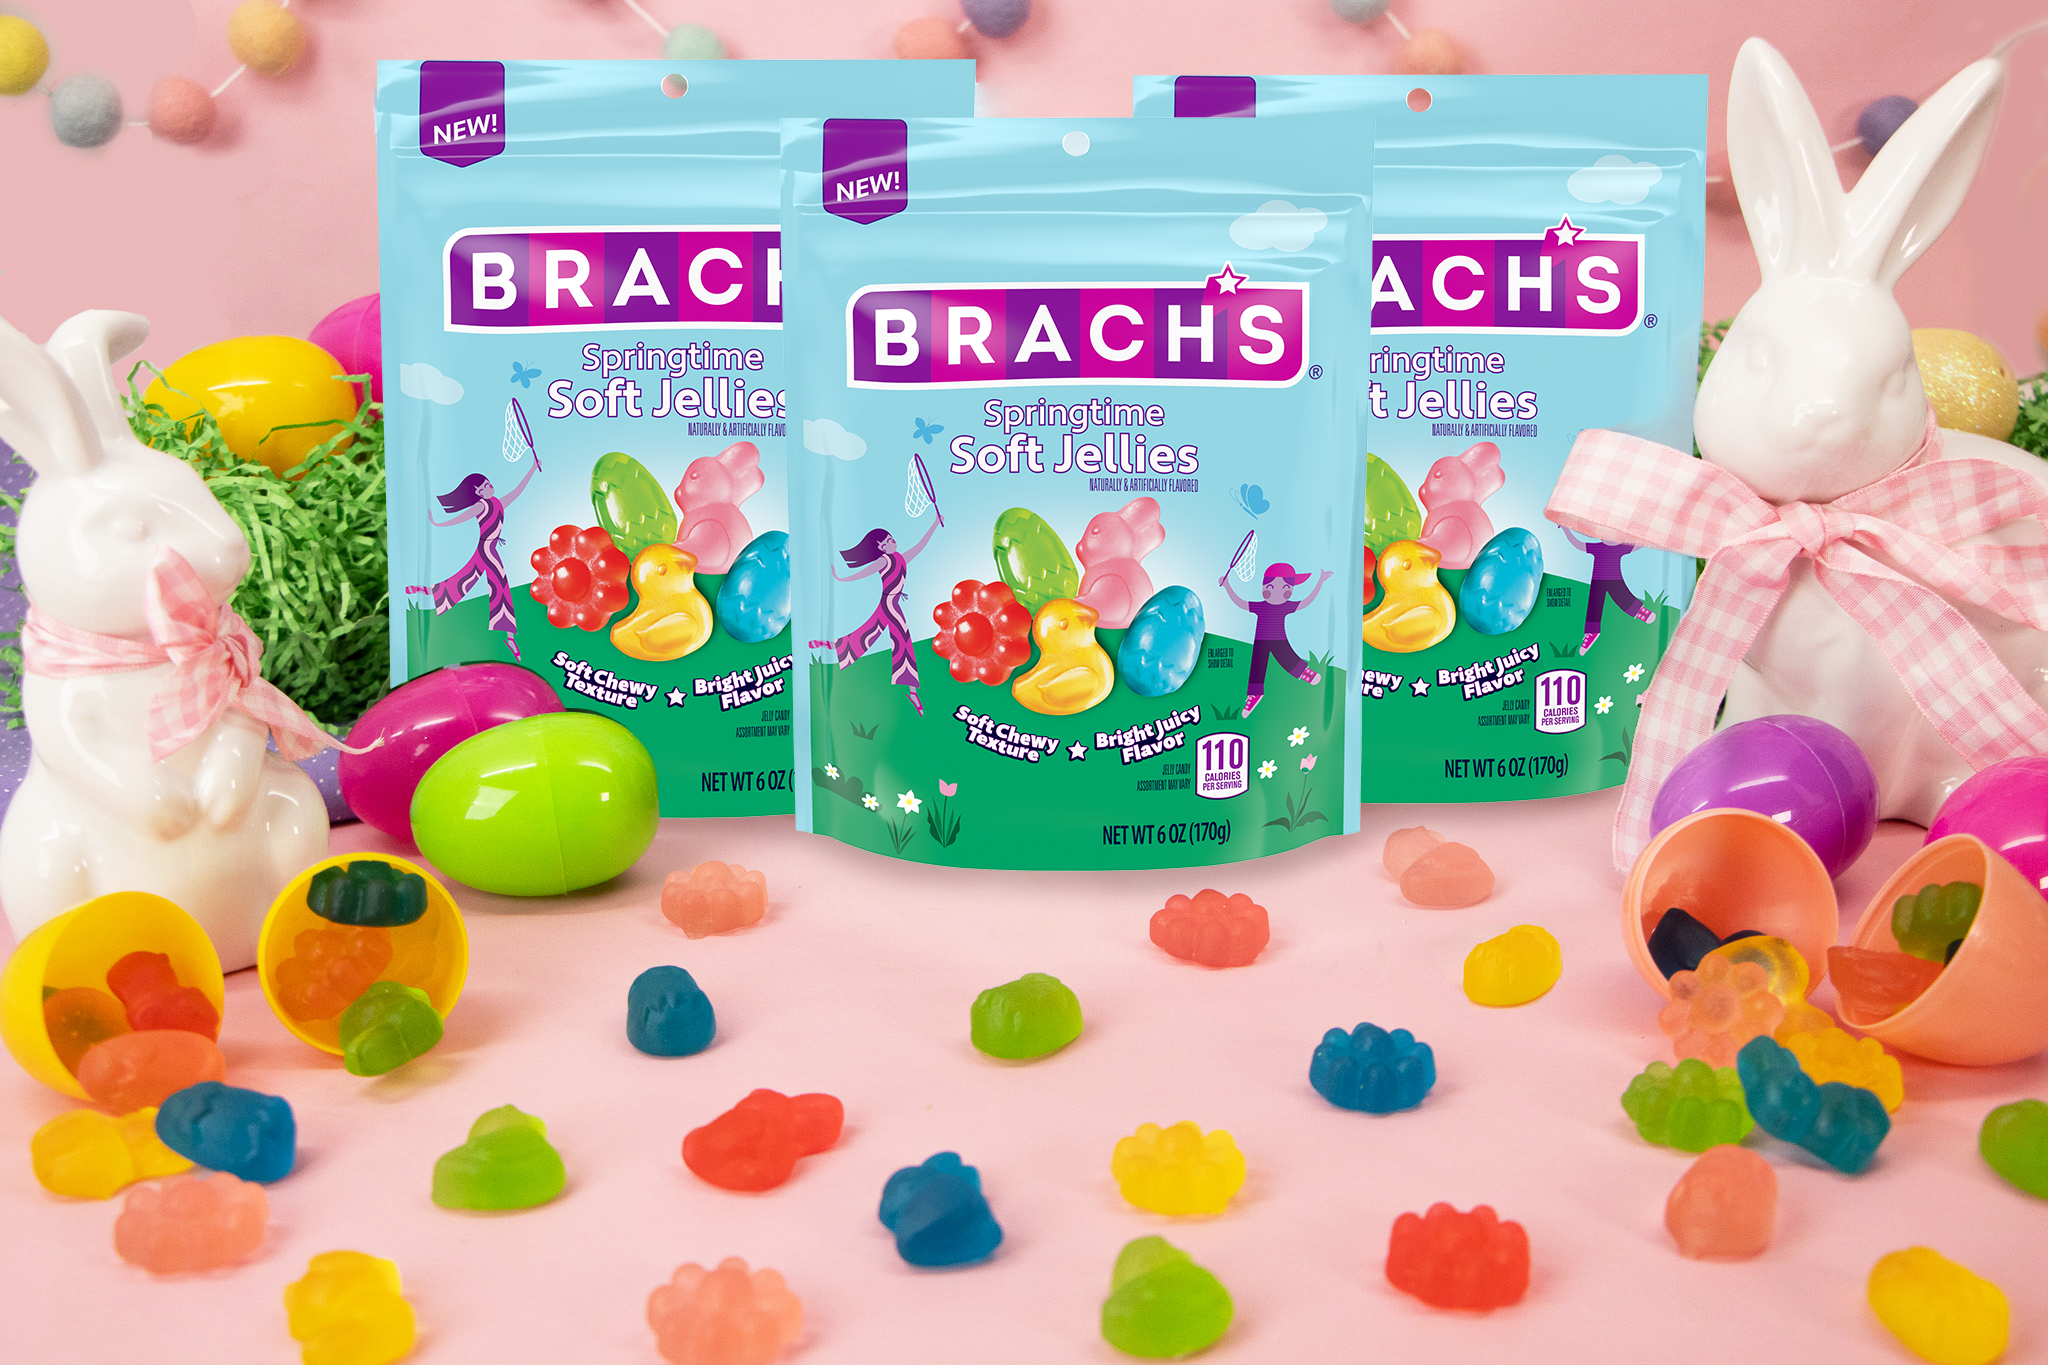 Celebrate Easter with Brach's brunch-inspired jelly beans